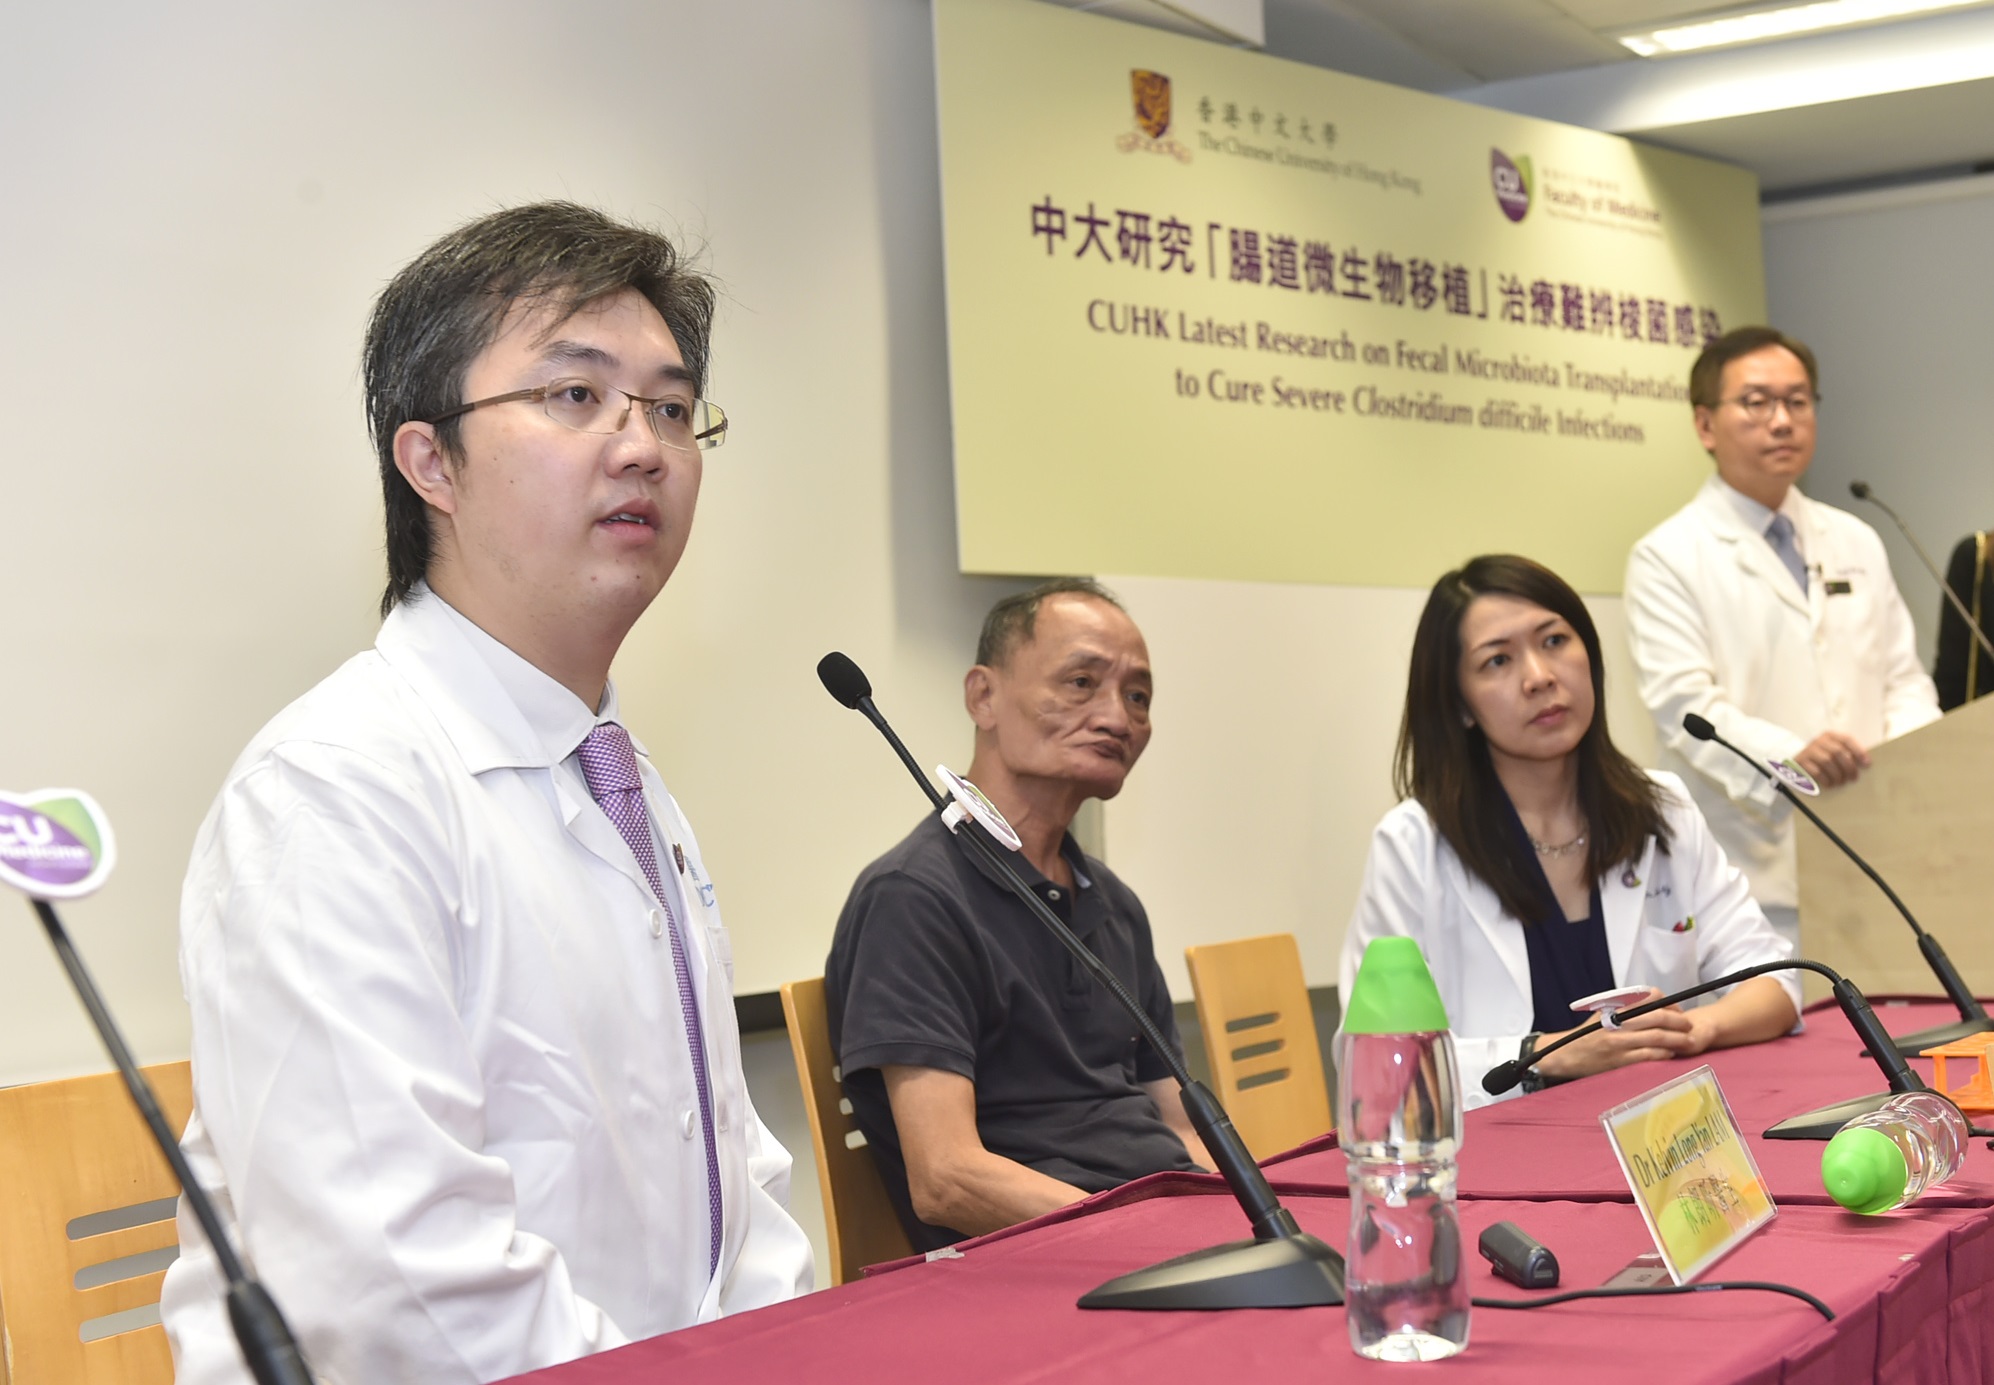 Mr Cheng kept suffering from diarrhea after 3 courses of antibiotic treatment. After FMT treatment